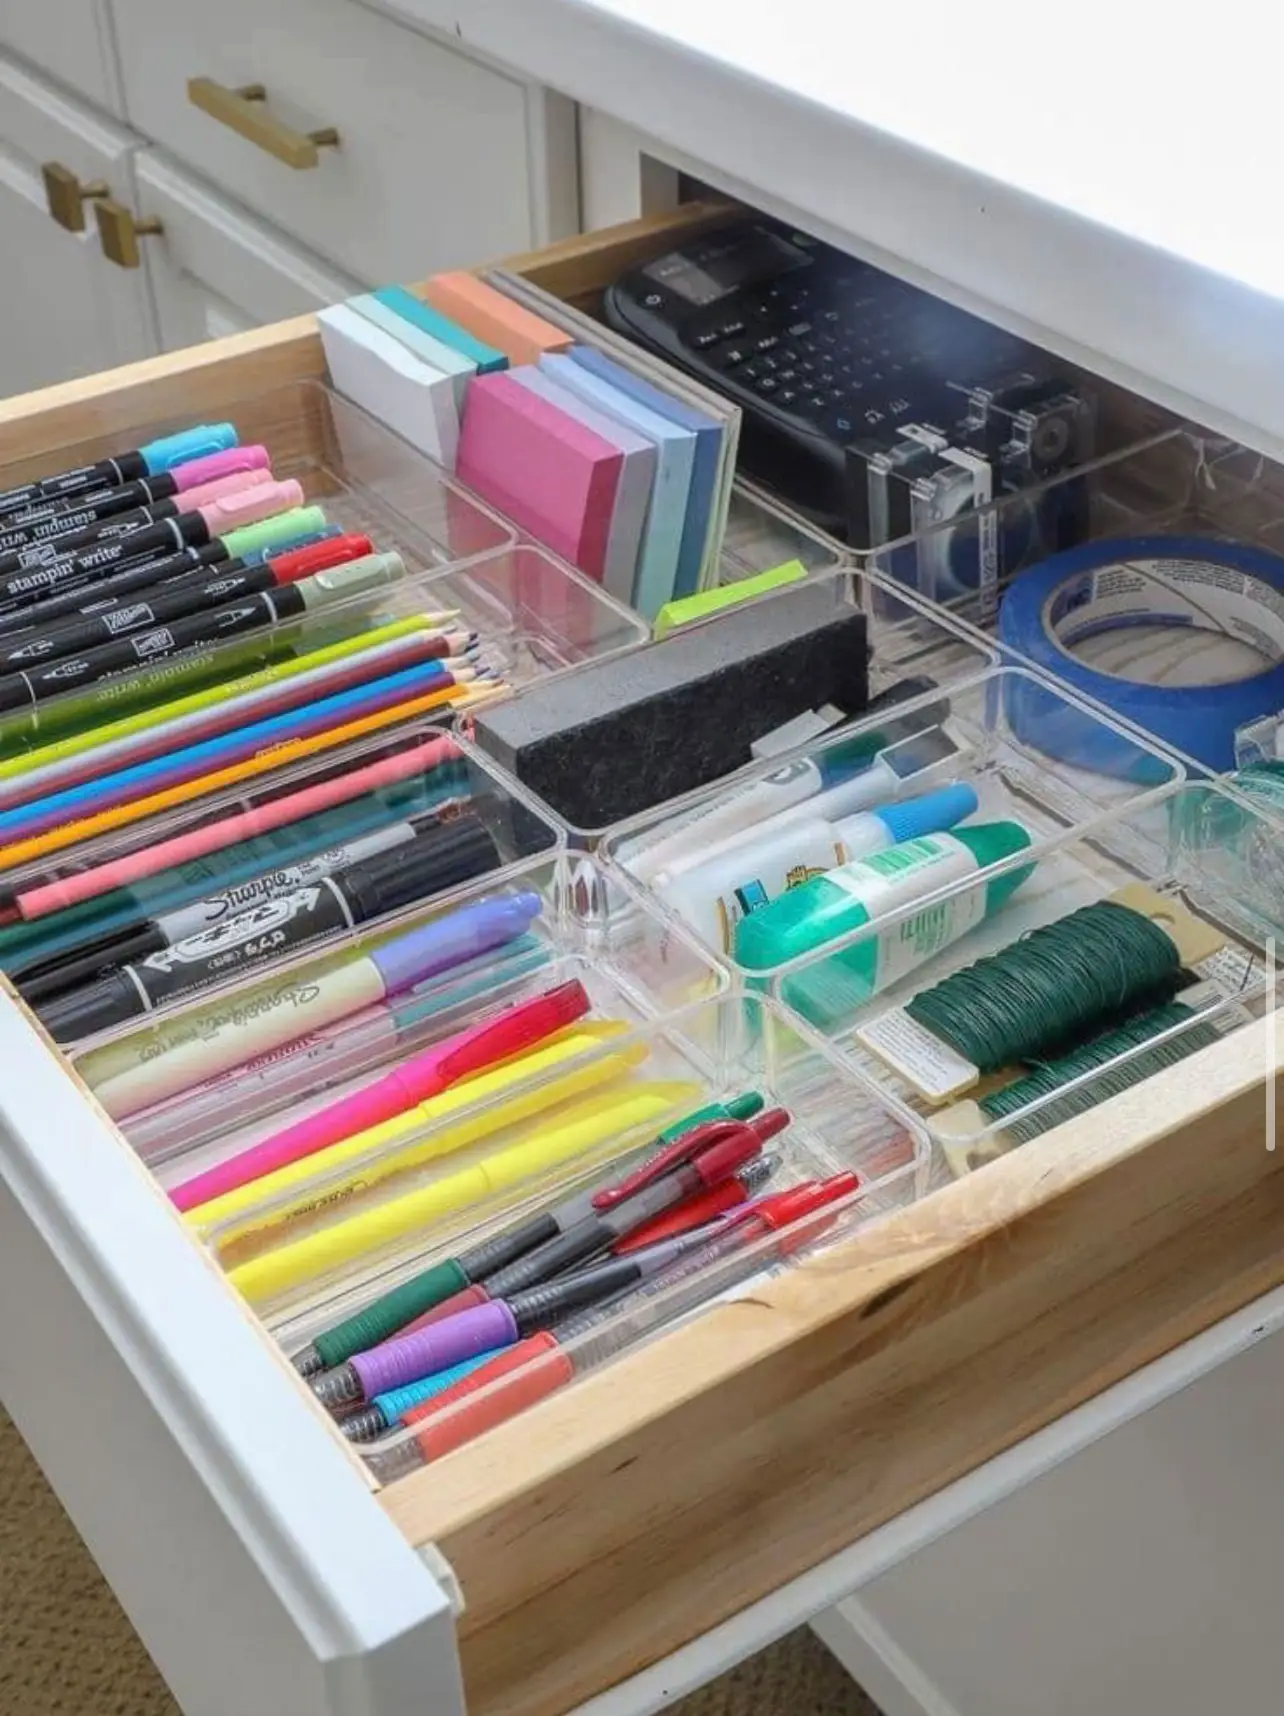  A drawer with a white desk and a variety of office supplies inside.